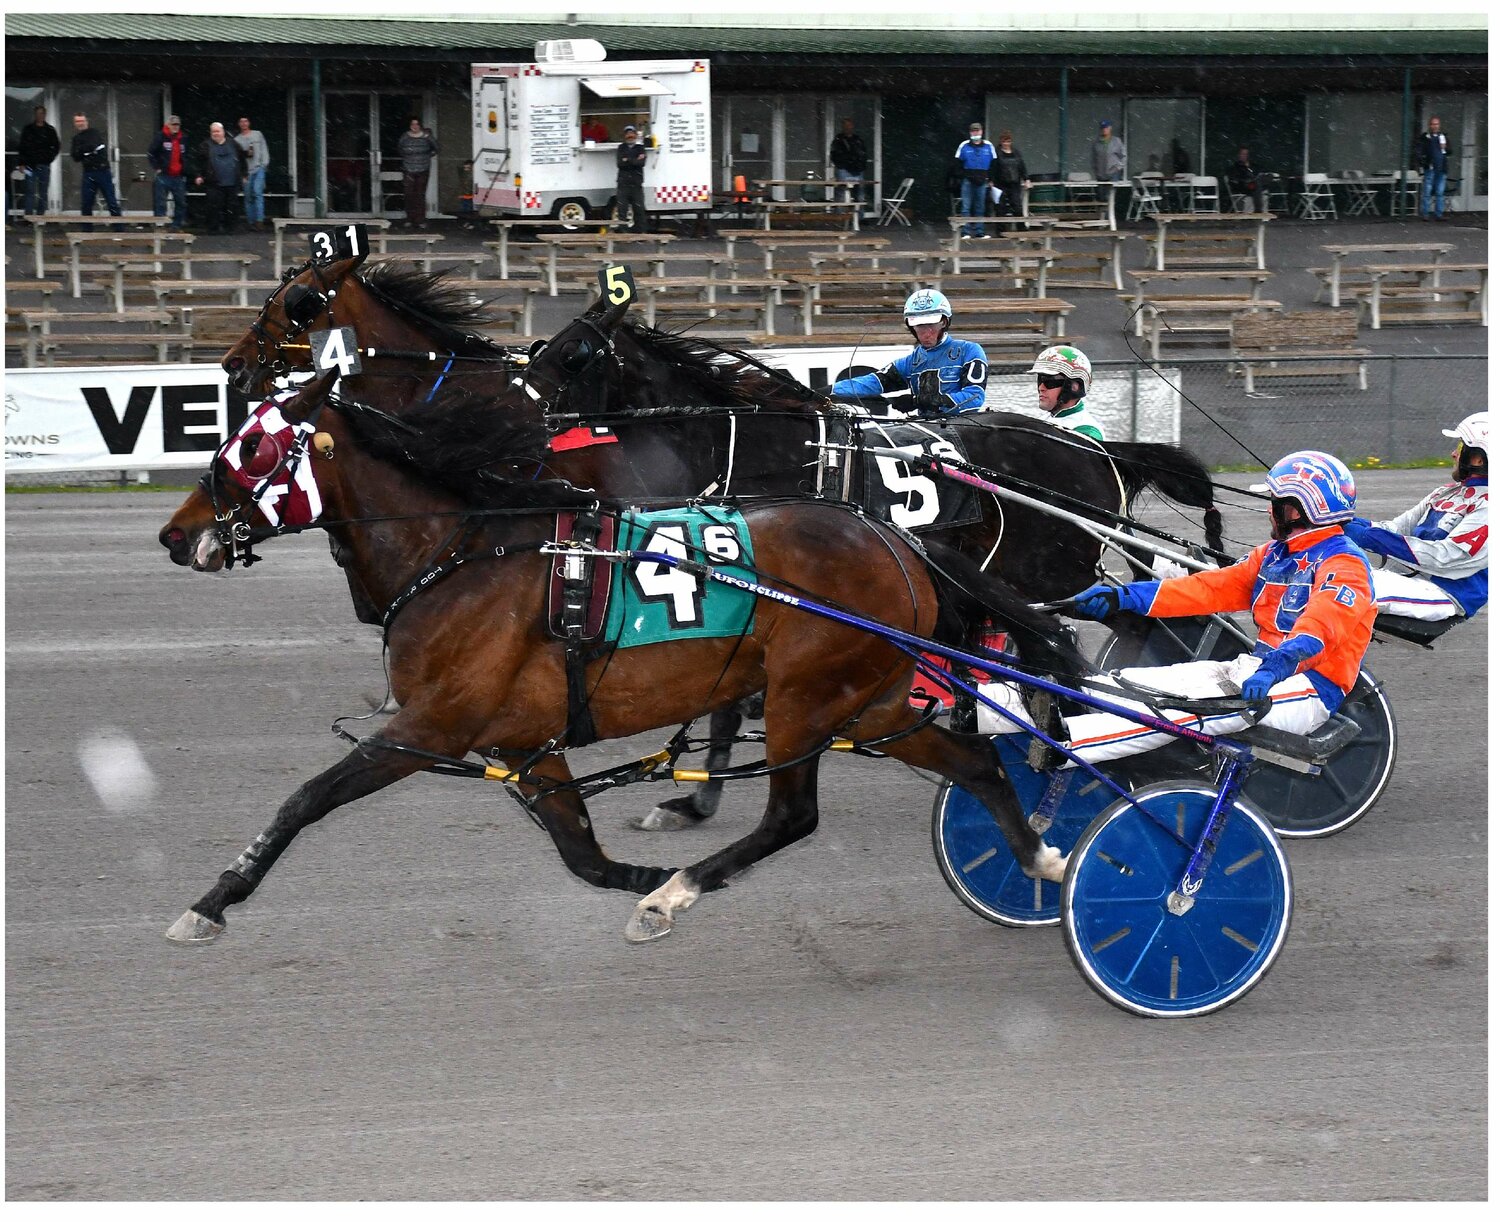 Special Olivia with driver Leon Bailey dug in to win the featured $5,500 fillies &amp; mares’ pace on Friday night at Vernon Downs.